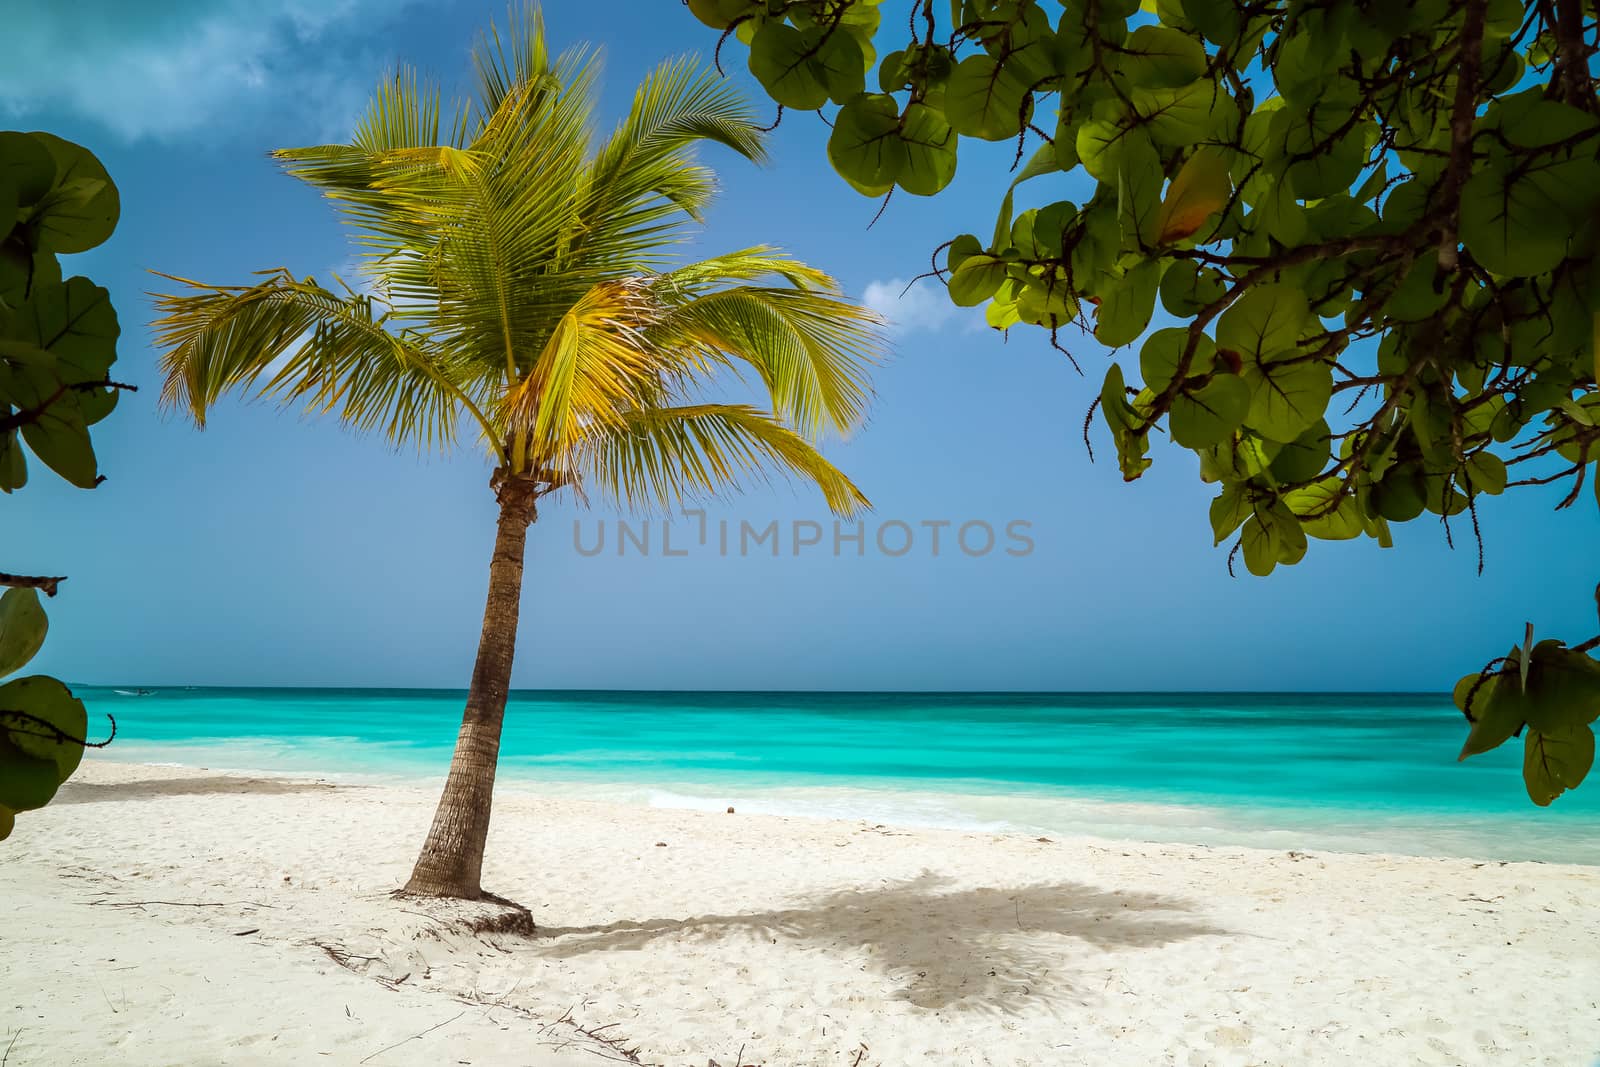 View of the palm tree through the natural framing of leaves. Beautiful caribbean beach on Saona island. Tropical beach background, white sand, azure water and palm tree branches over blue sky. Caribbean Sea coast, Dominican republic, Saona island.